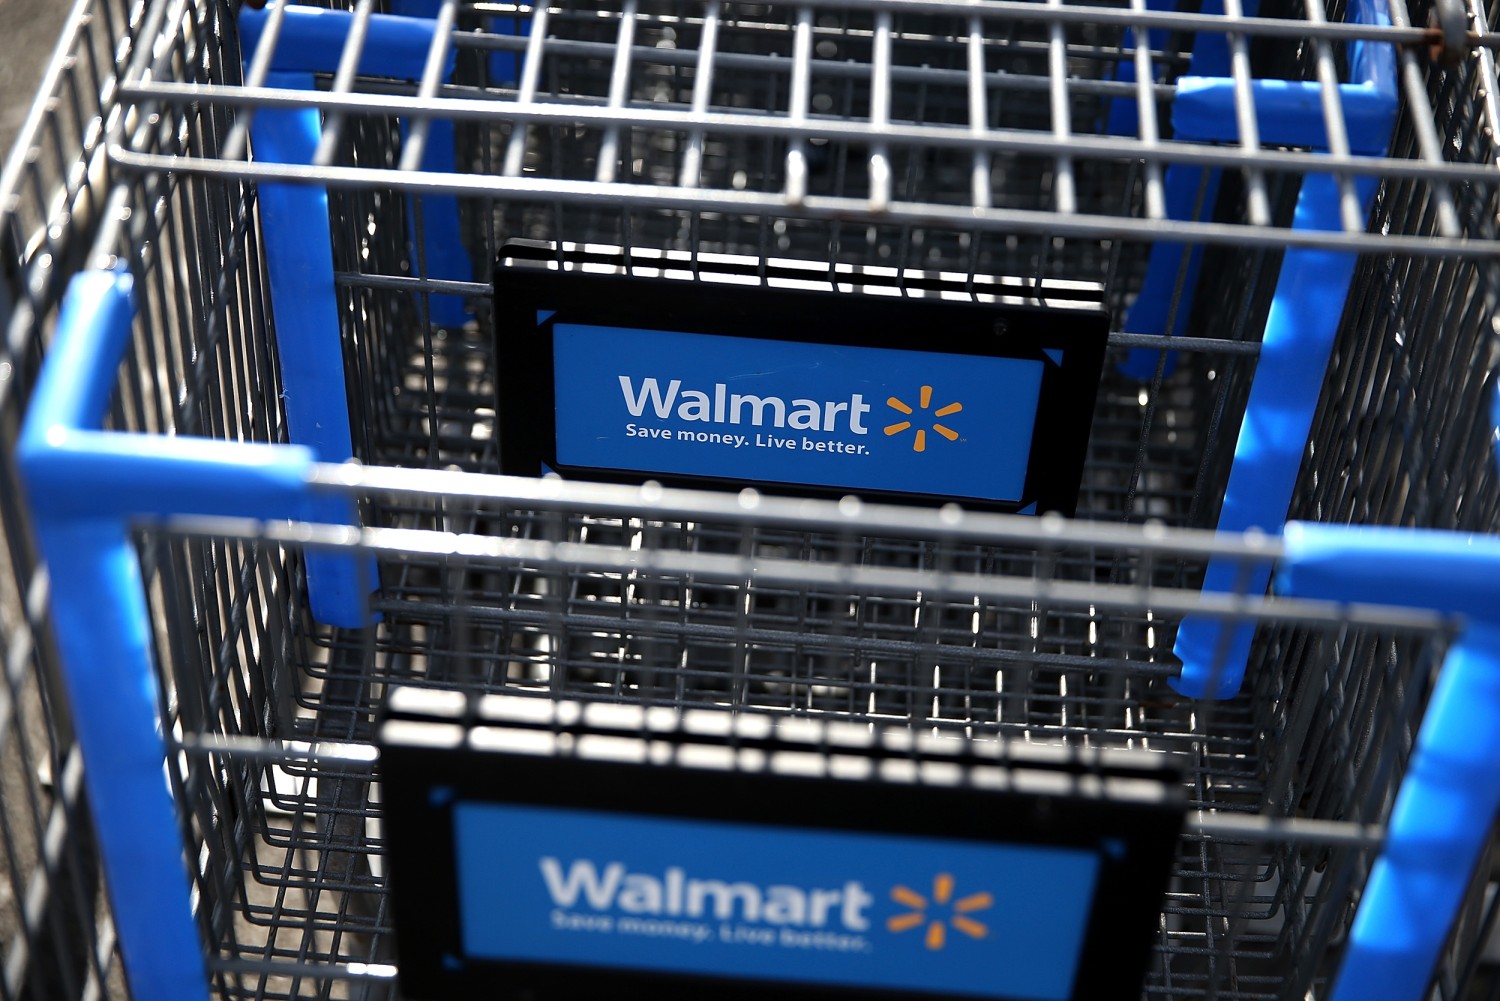 Florida face mask law: Mesh-mask man goes to Walmart as protest